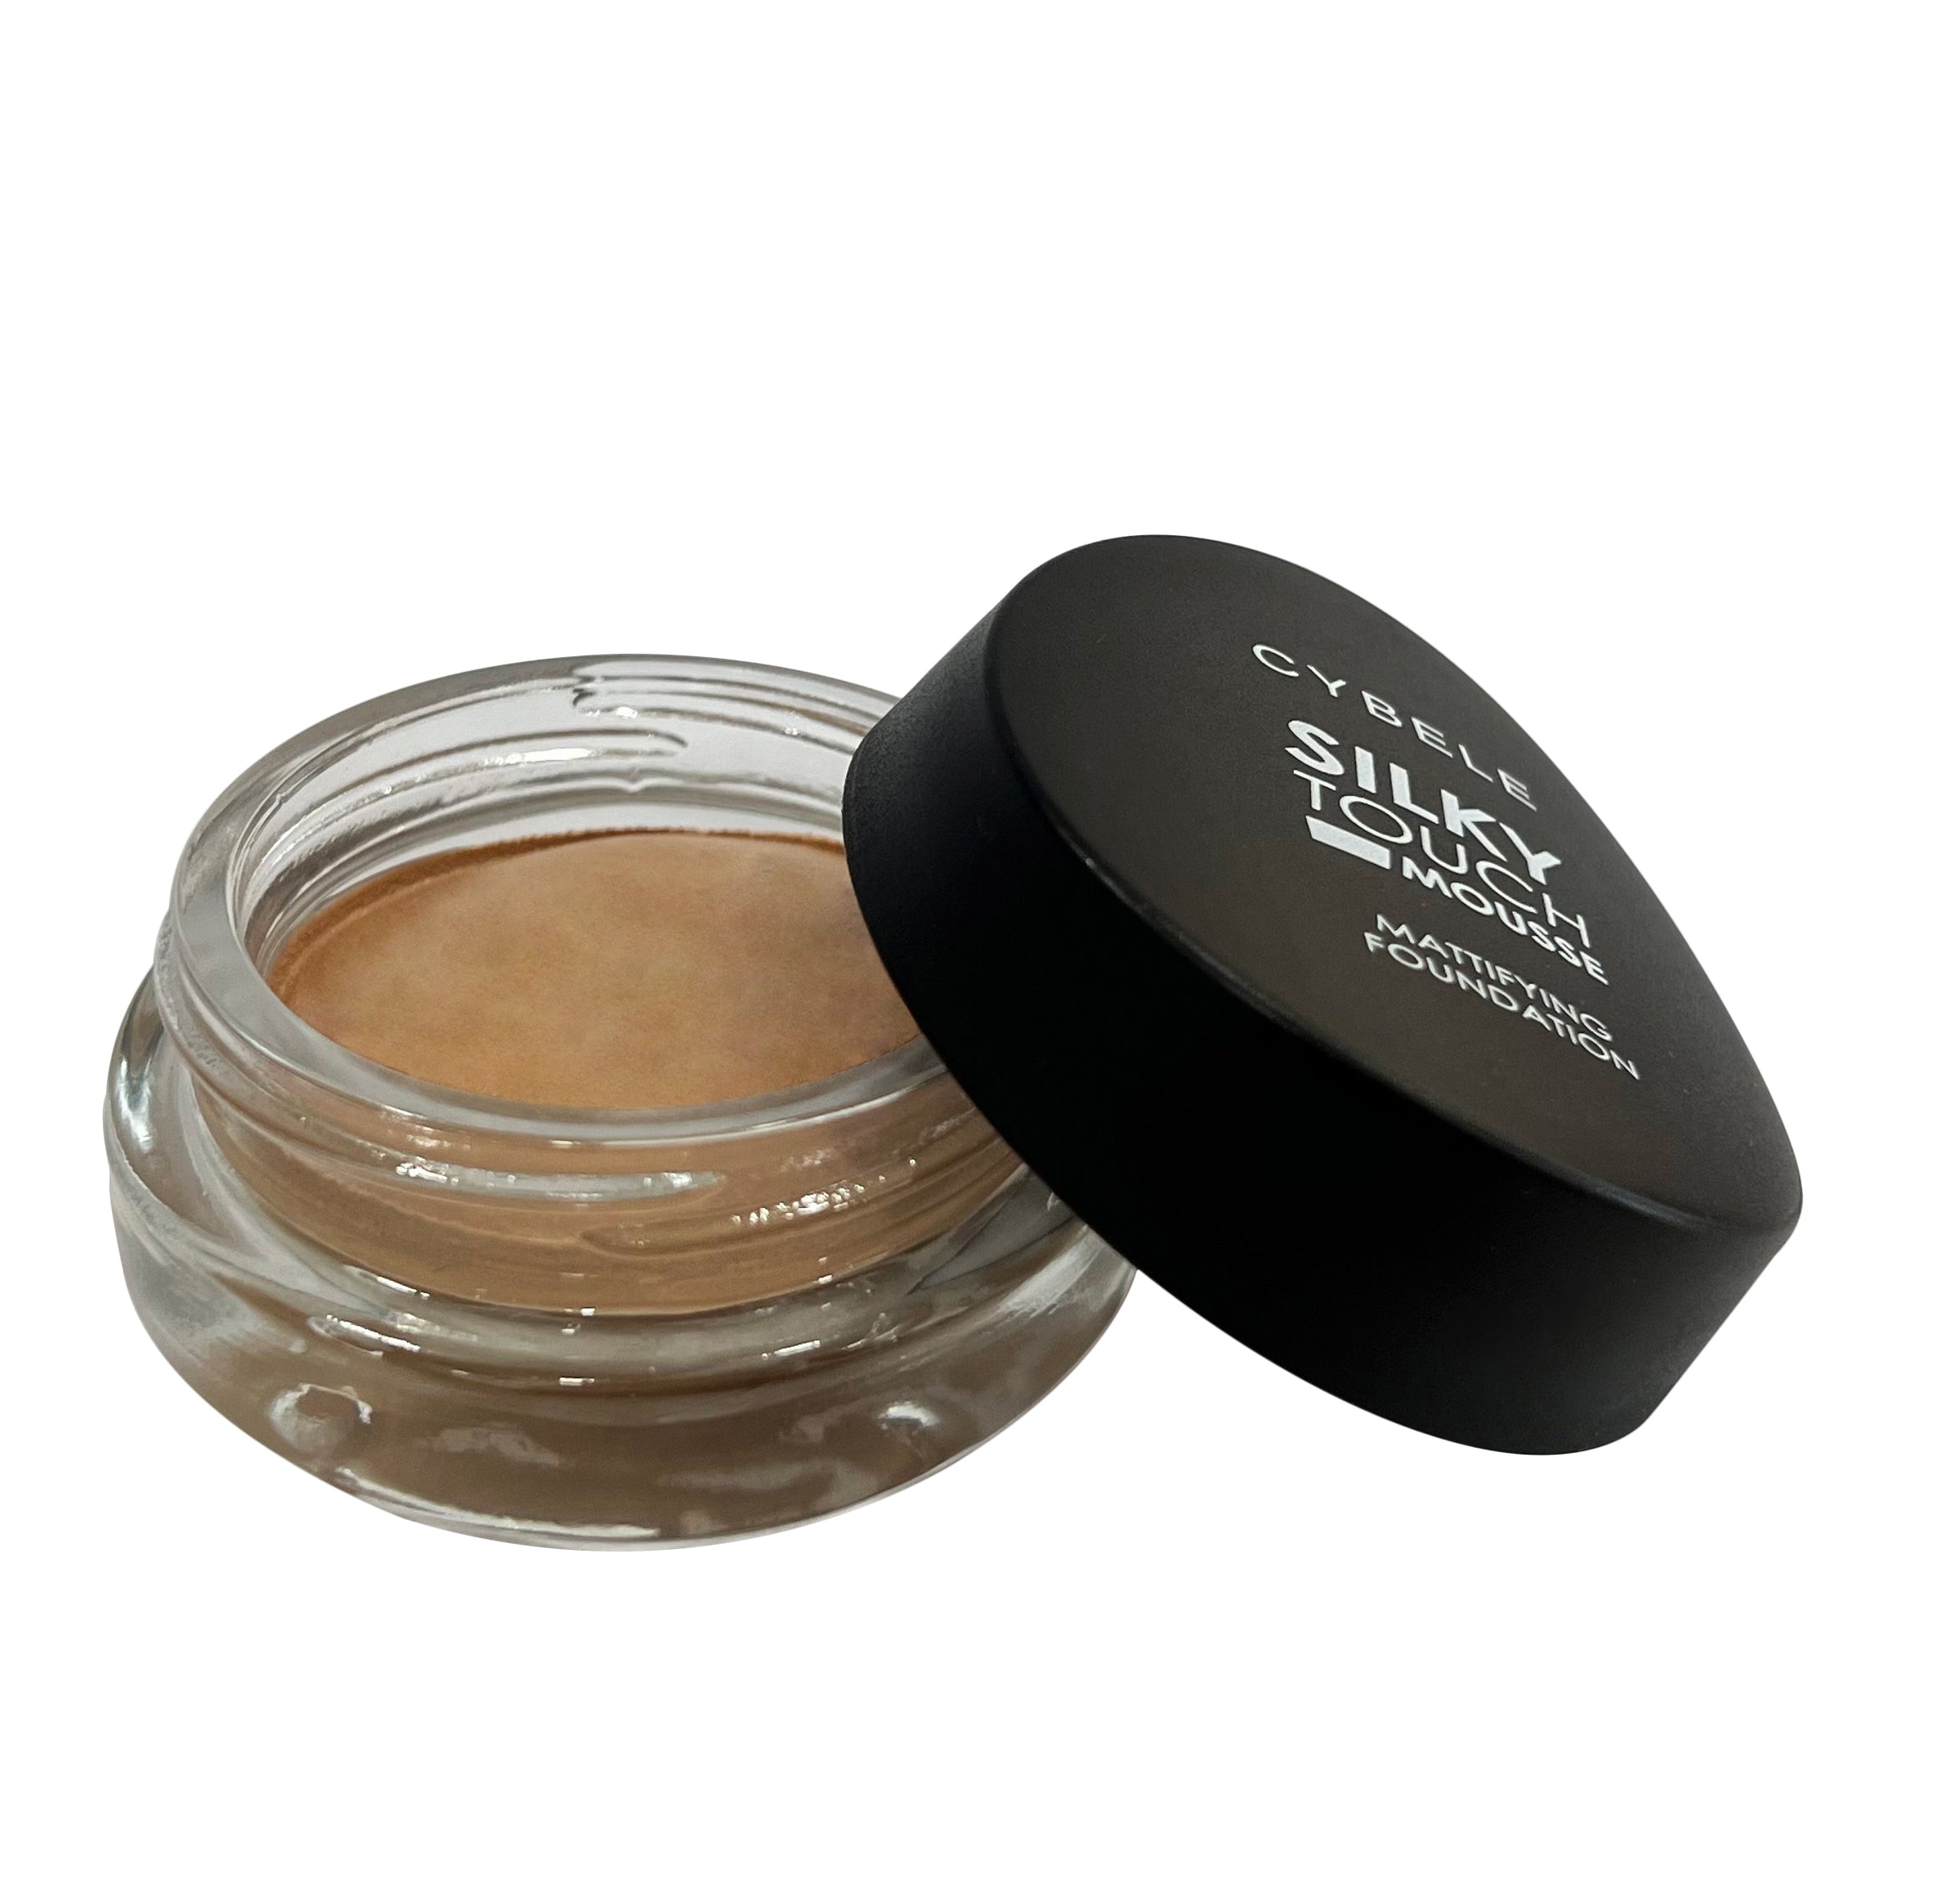 CYBELE Silky Touch Mousse Mattifying Foundation